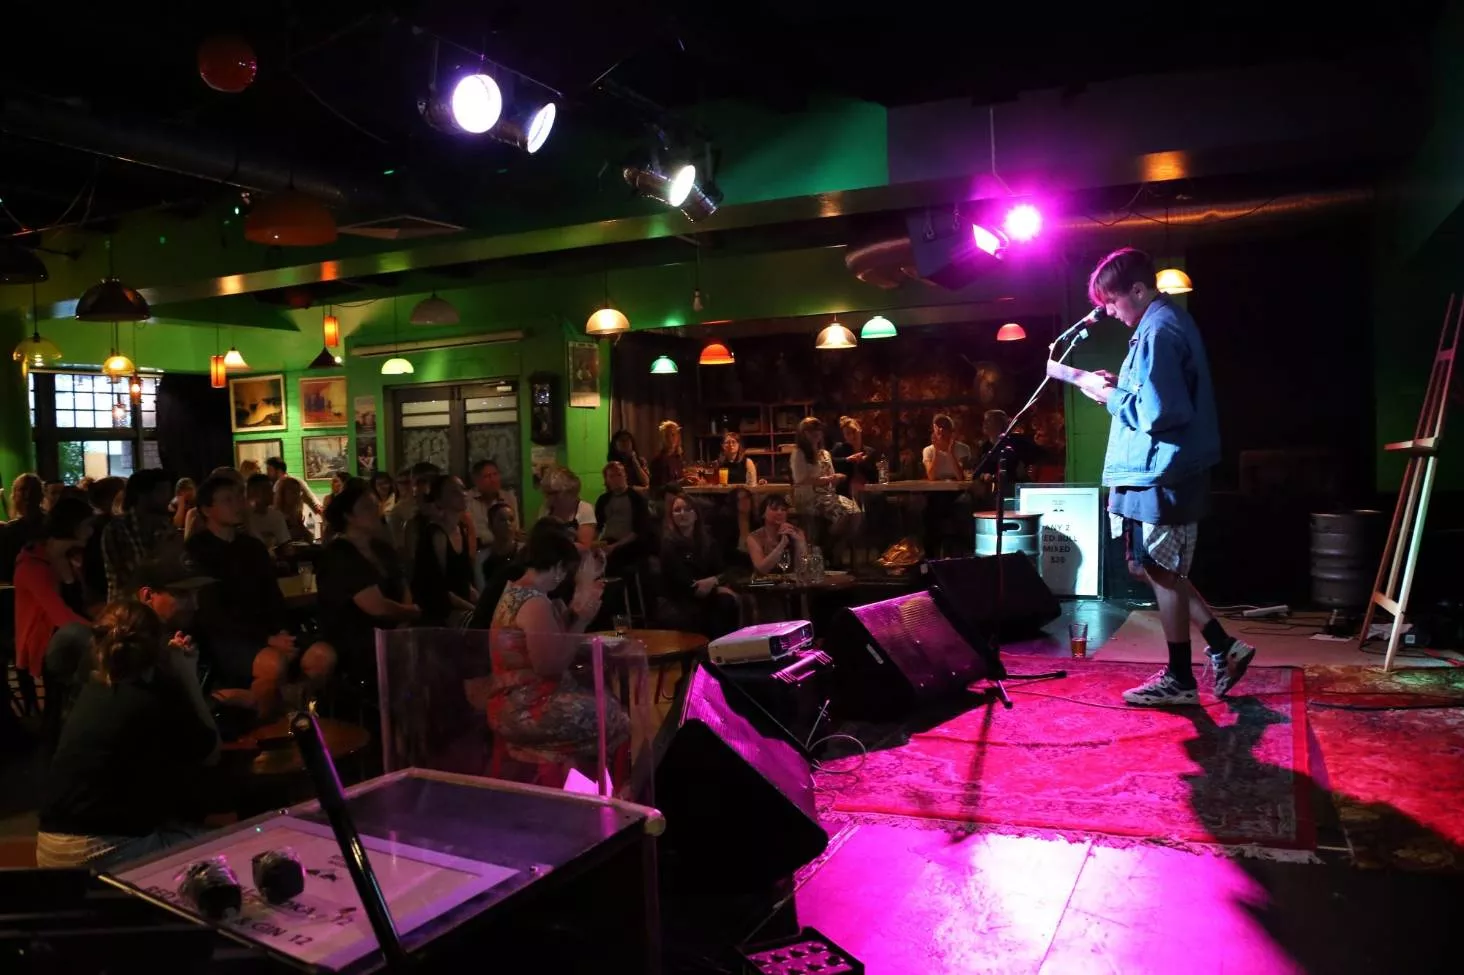 Meow in New Zealand, Australia and Oceania | Live Music Venues - Rated 3.4